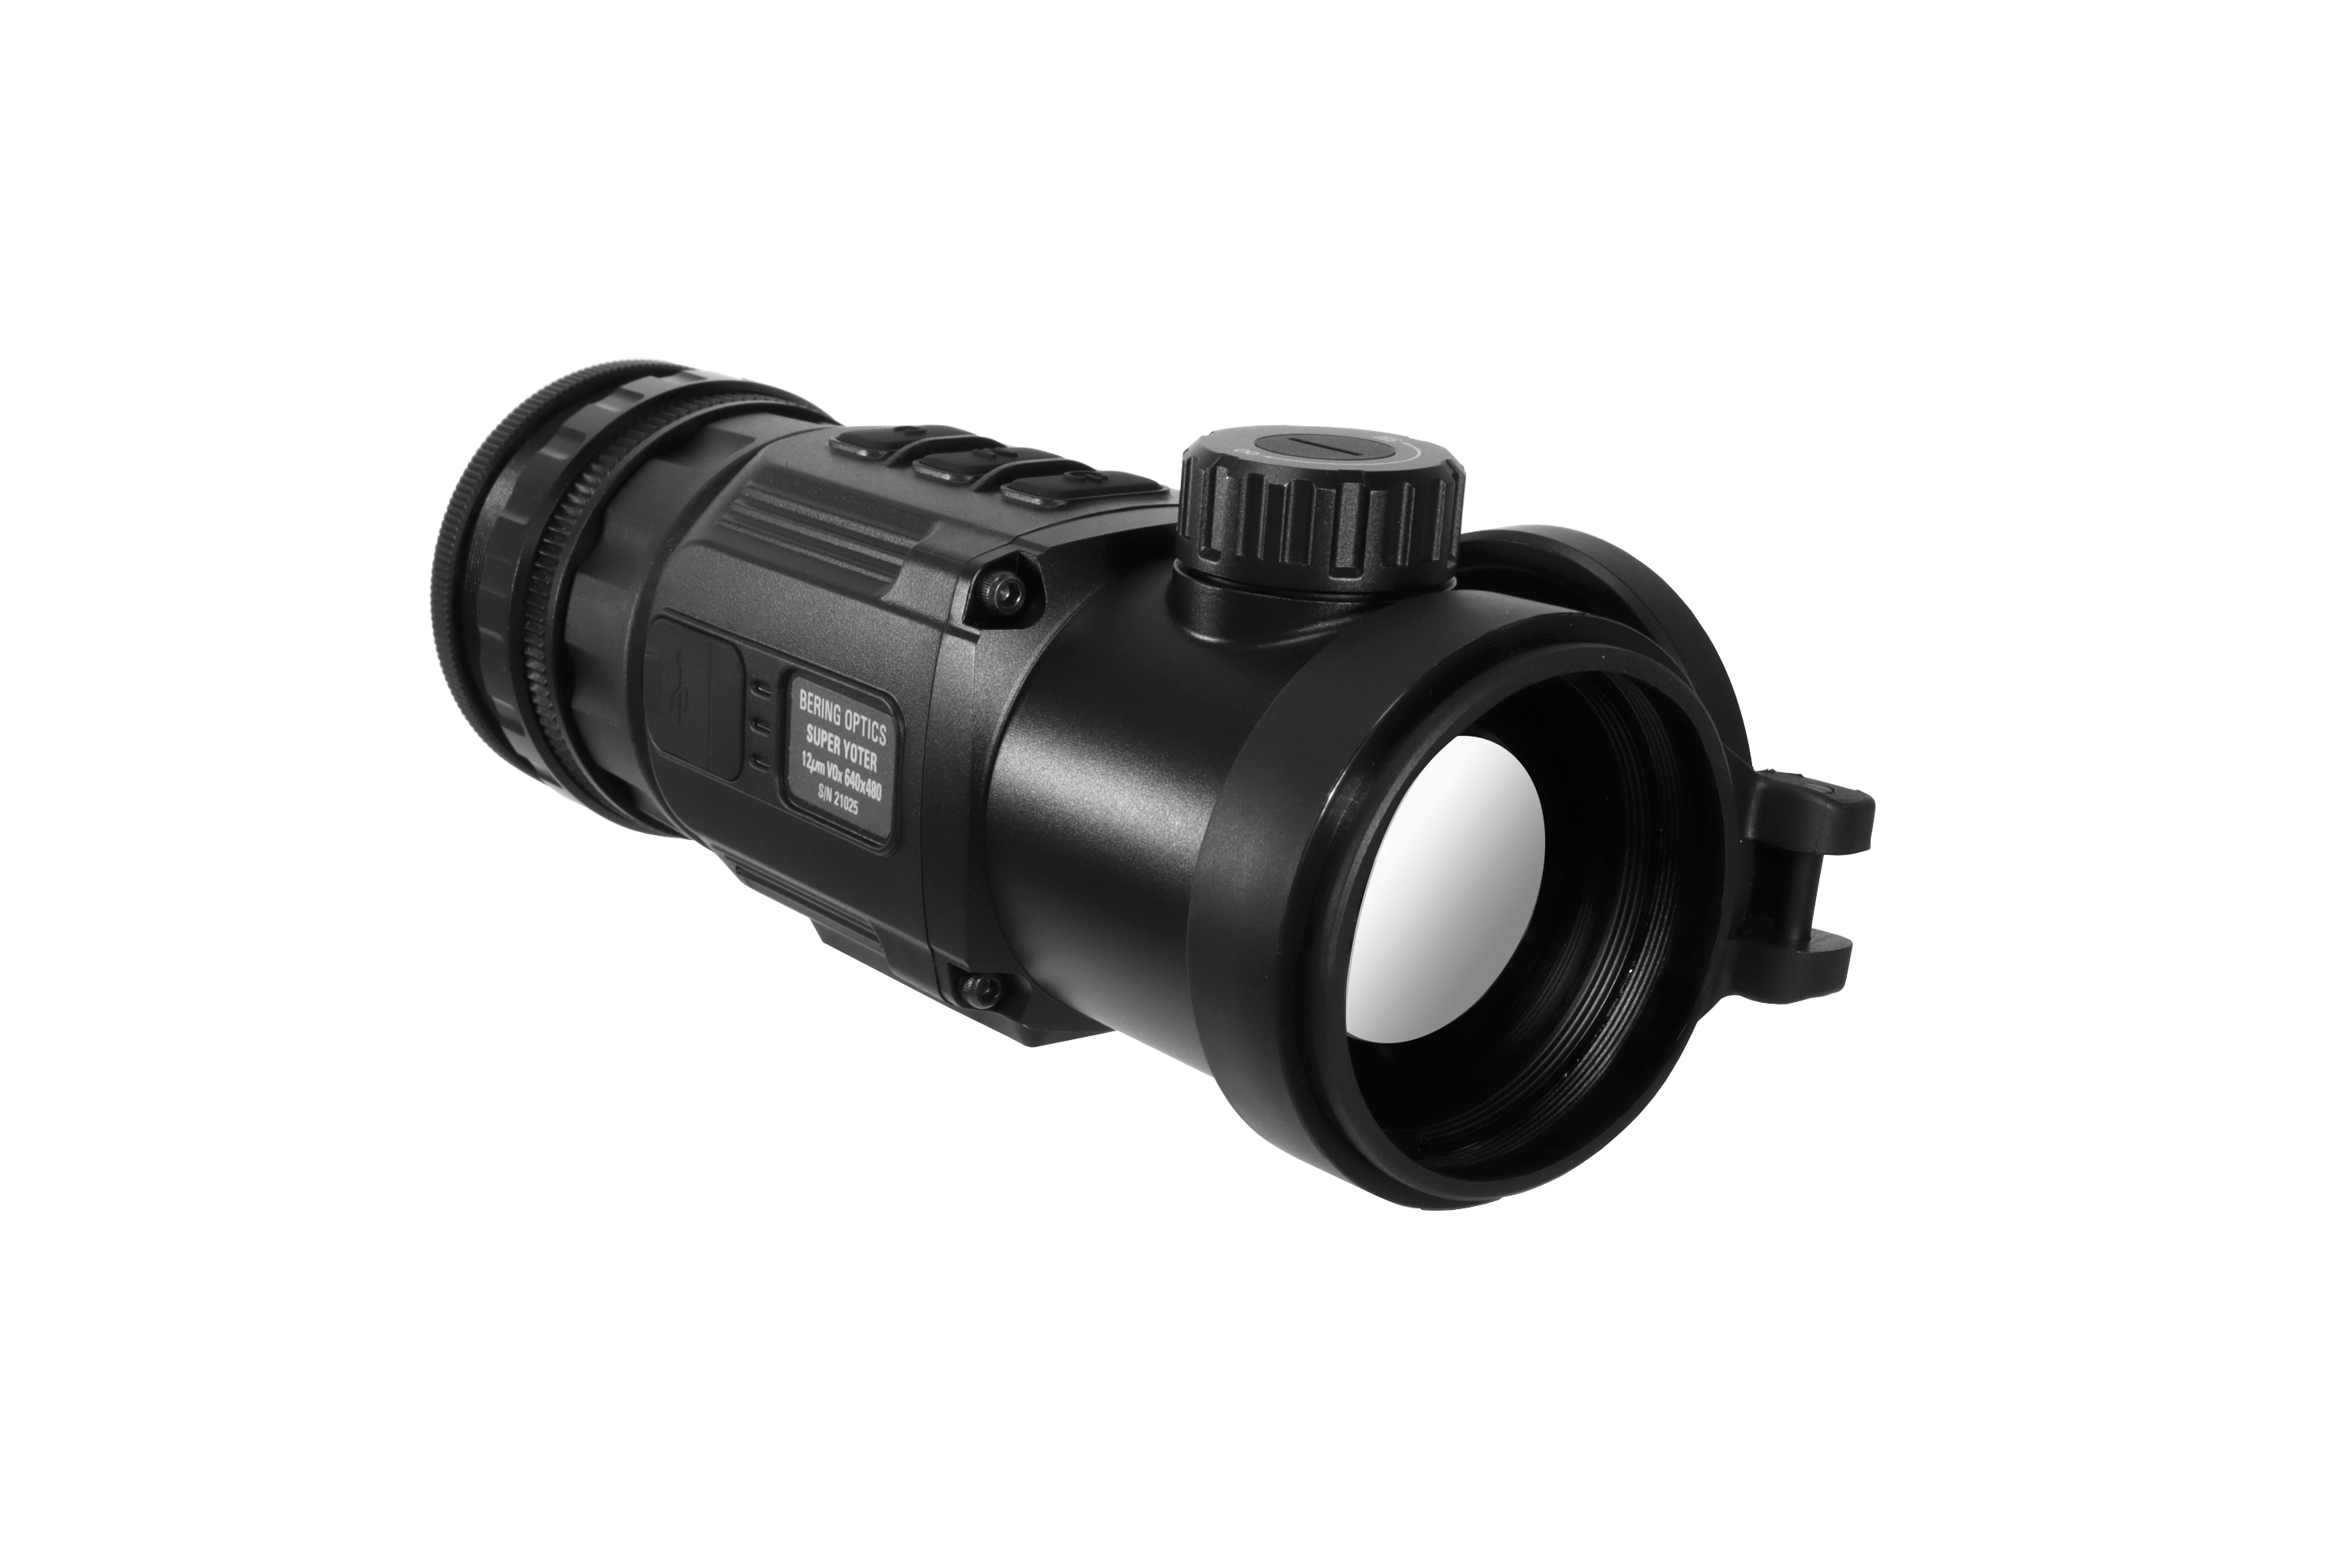 Bering Optics Super Yoter C, 640X480 50mm Clip-On/Monocular Thermal Imaging Scope*Current lead times 2-4 weeks*